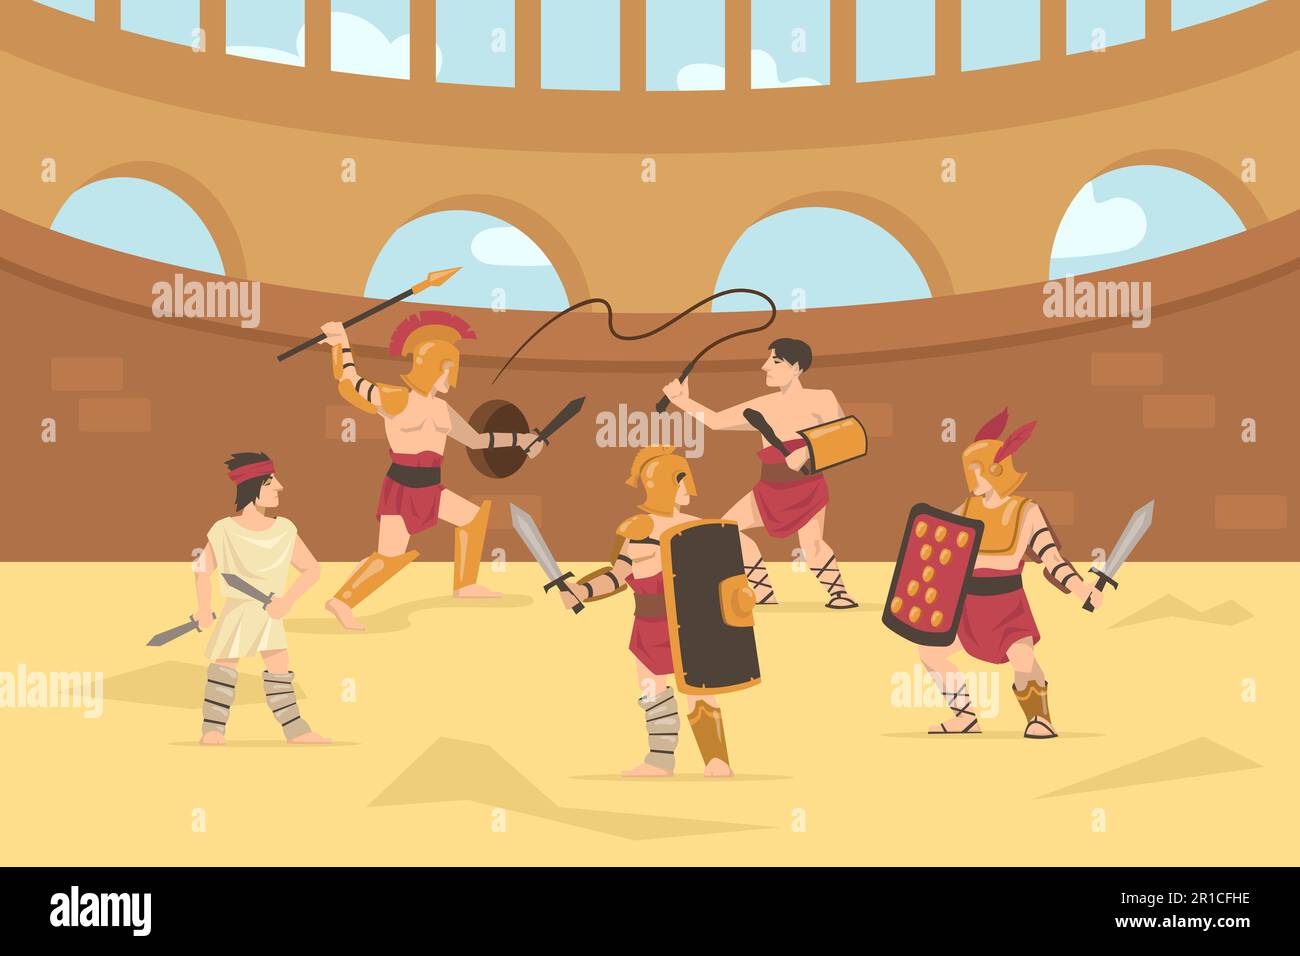 Roman armored soldiers fighting with swords, spears and whips Stock Vector